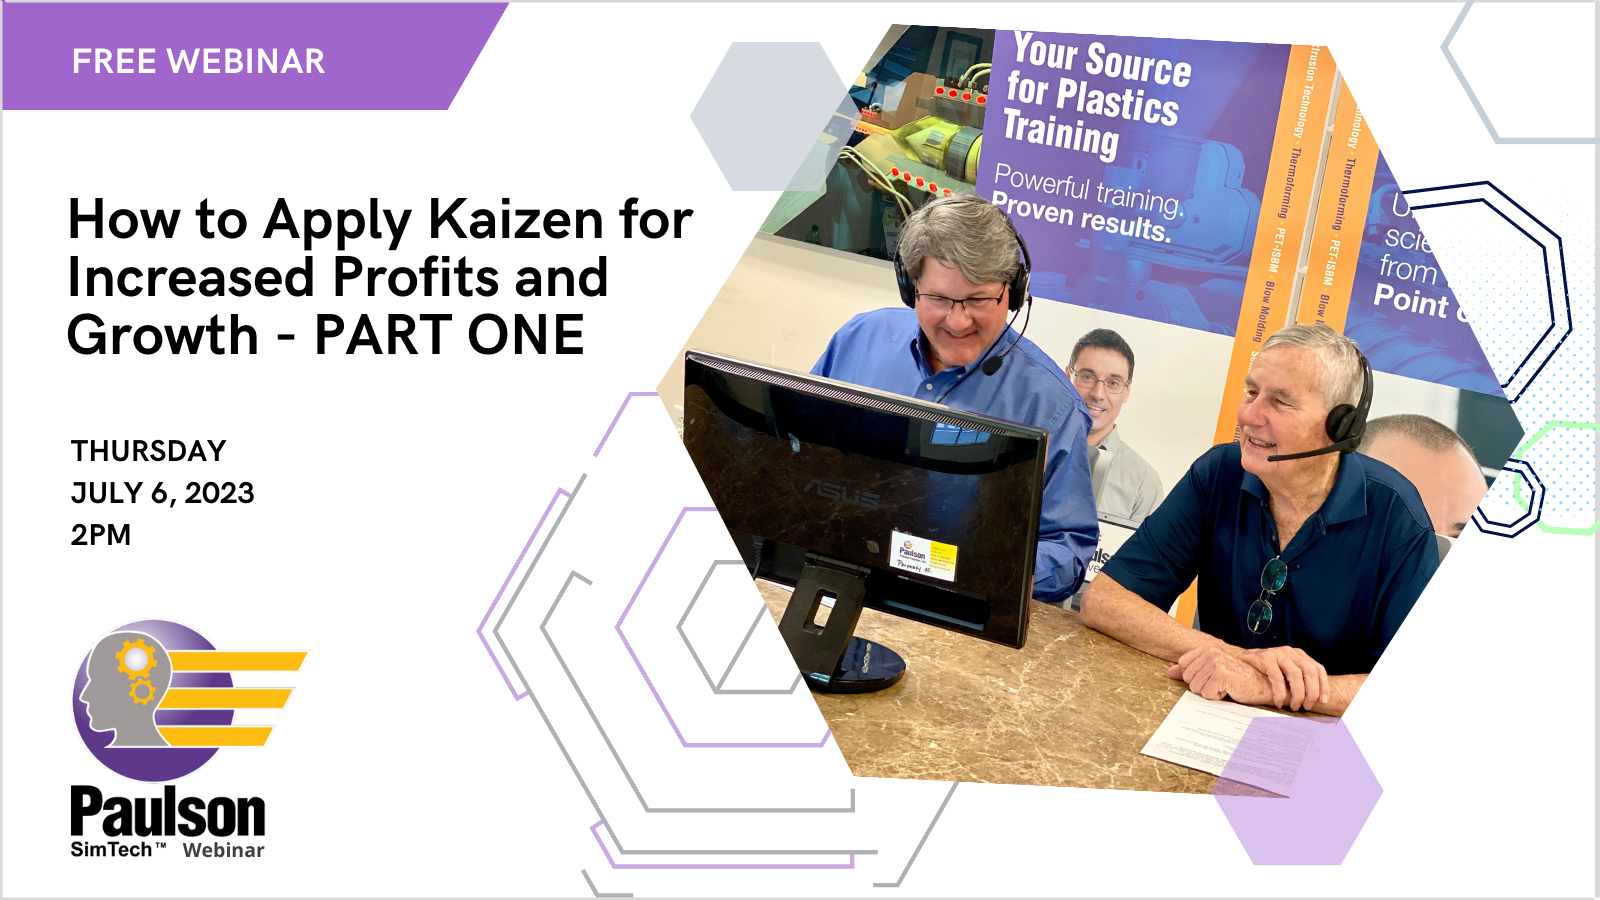 Webinar: How to Apply Kaizen to Increase Profits and Goals – Part One